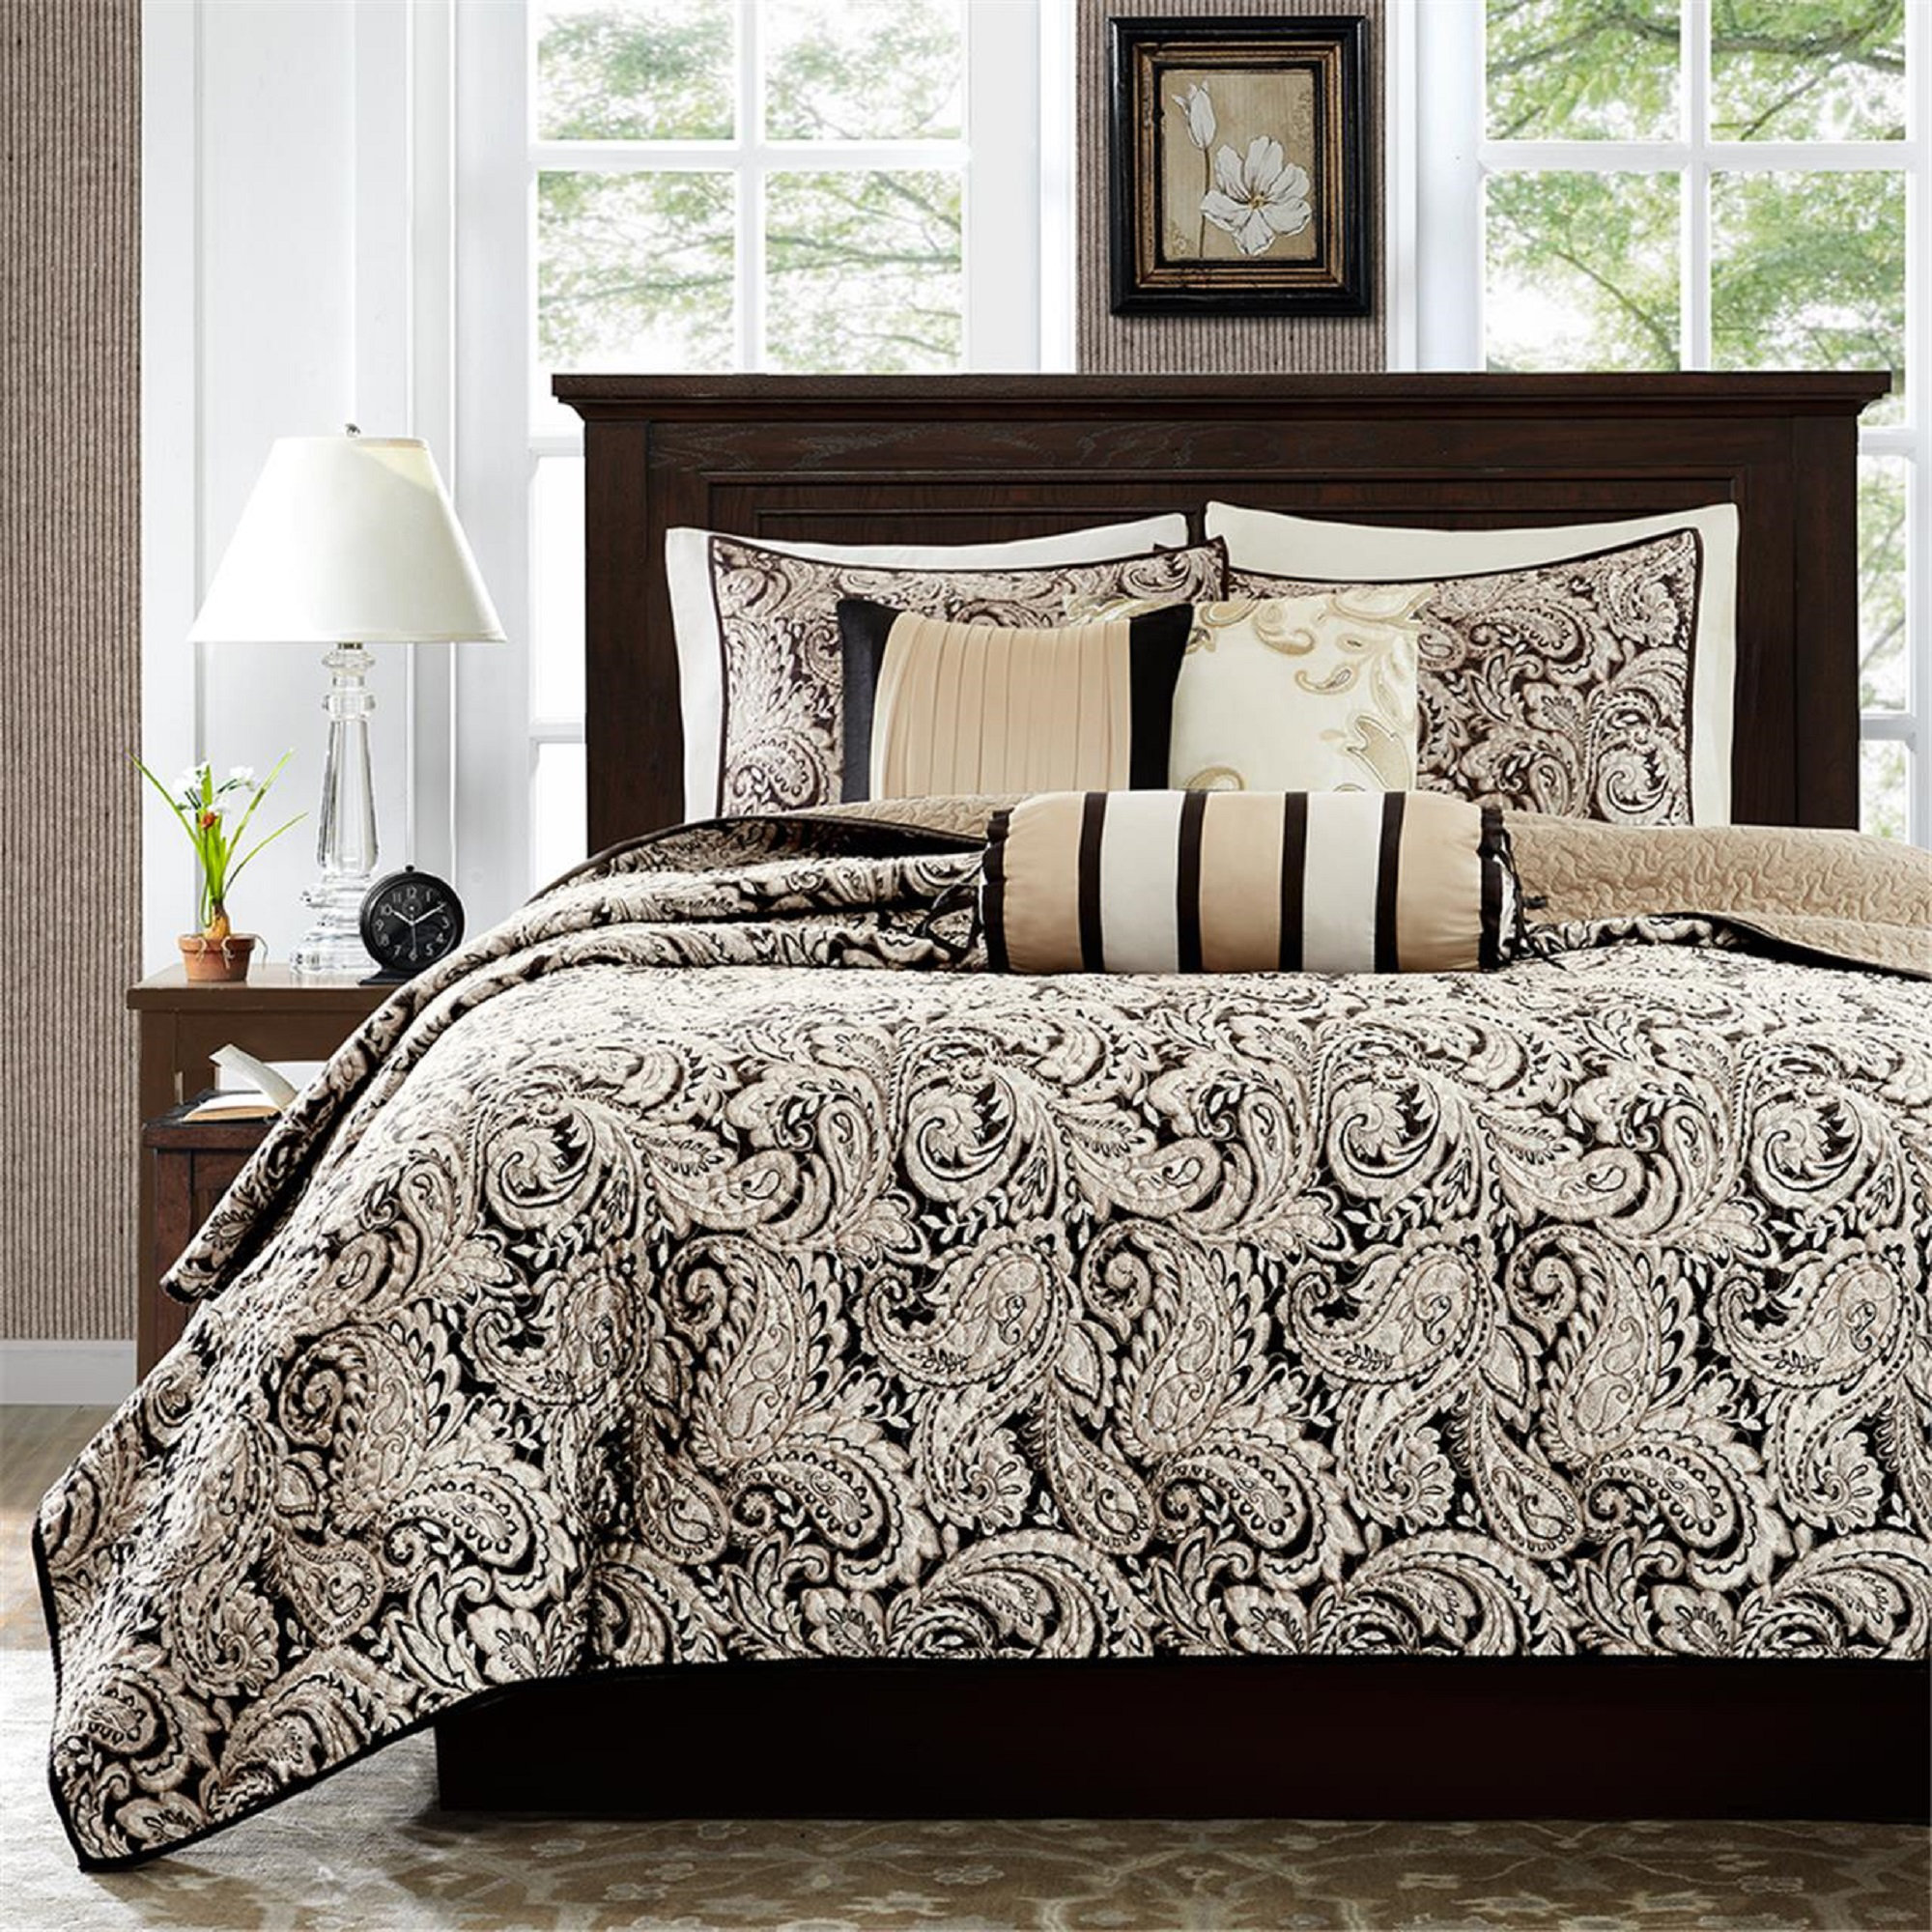 Bellagio 6 Piece Jacquard Quilt Set with Throw Pillows by Madison Park